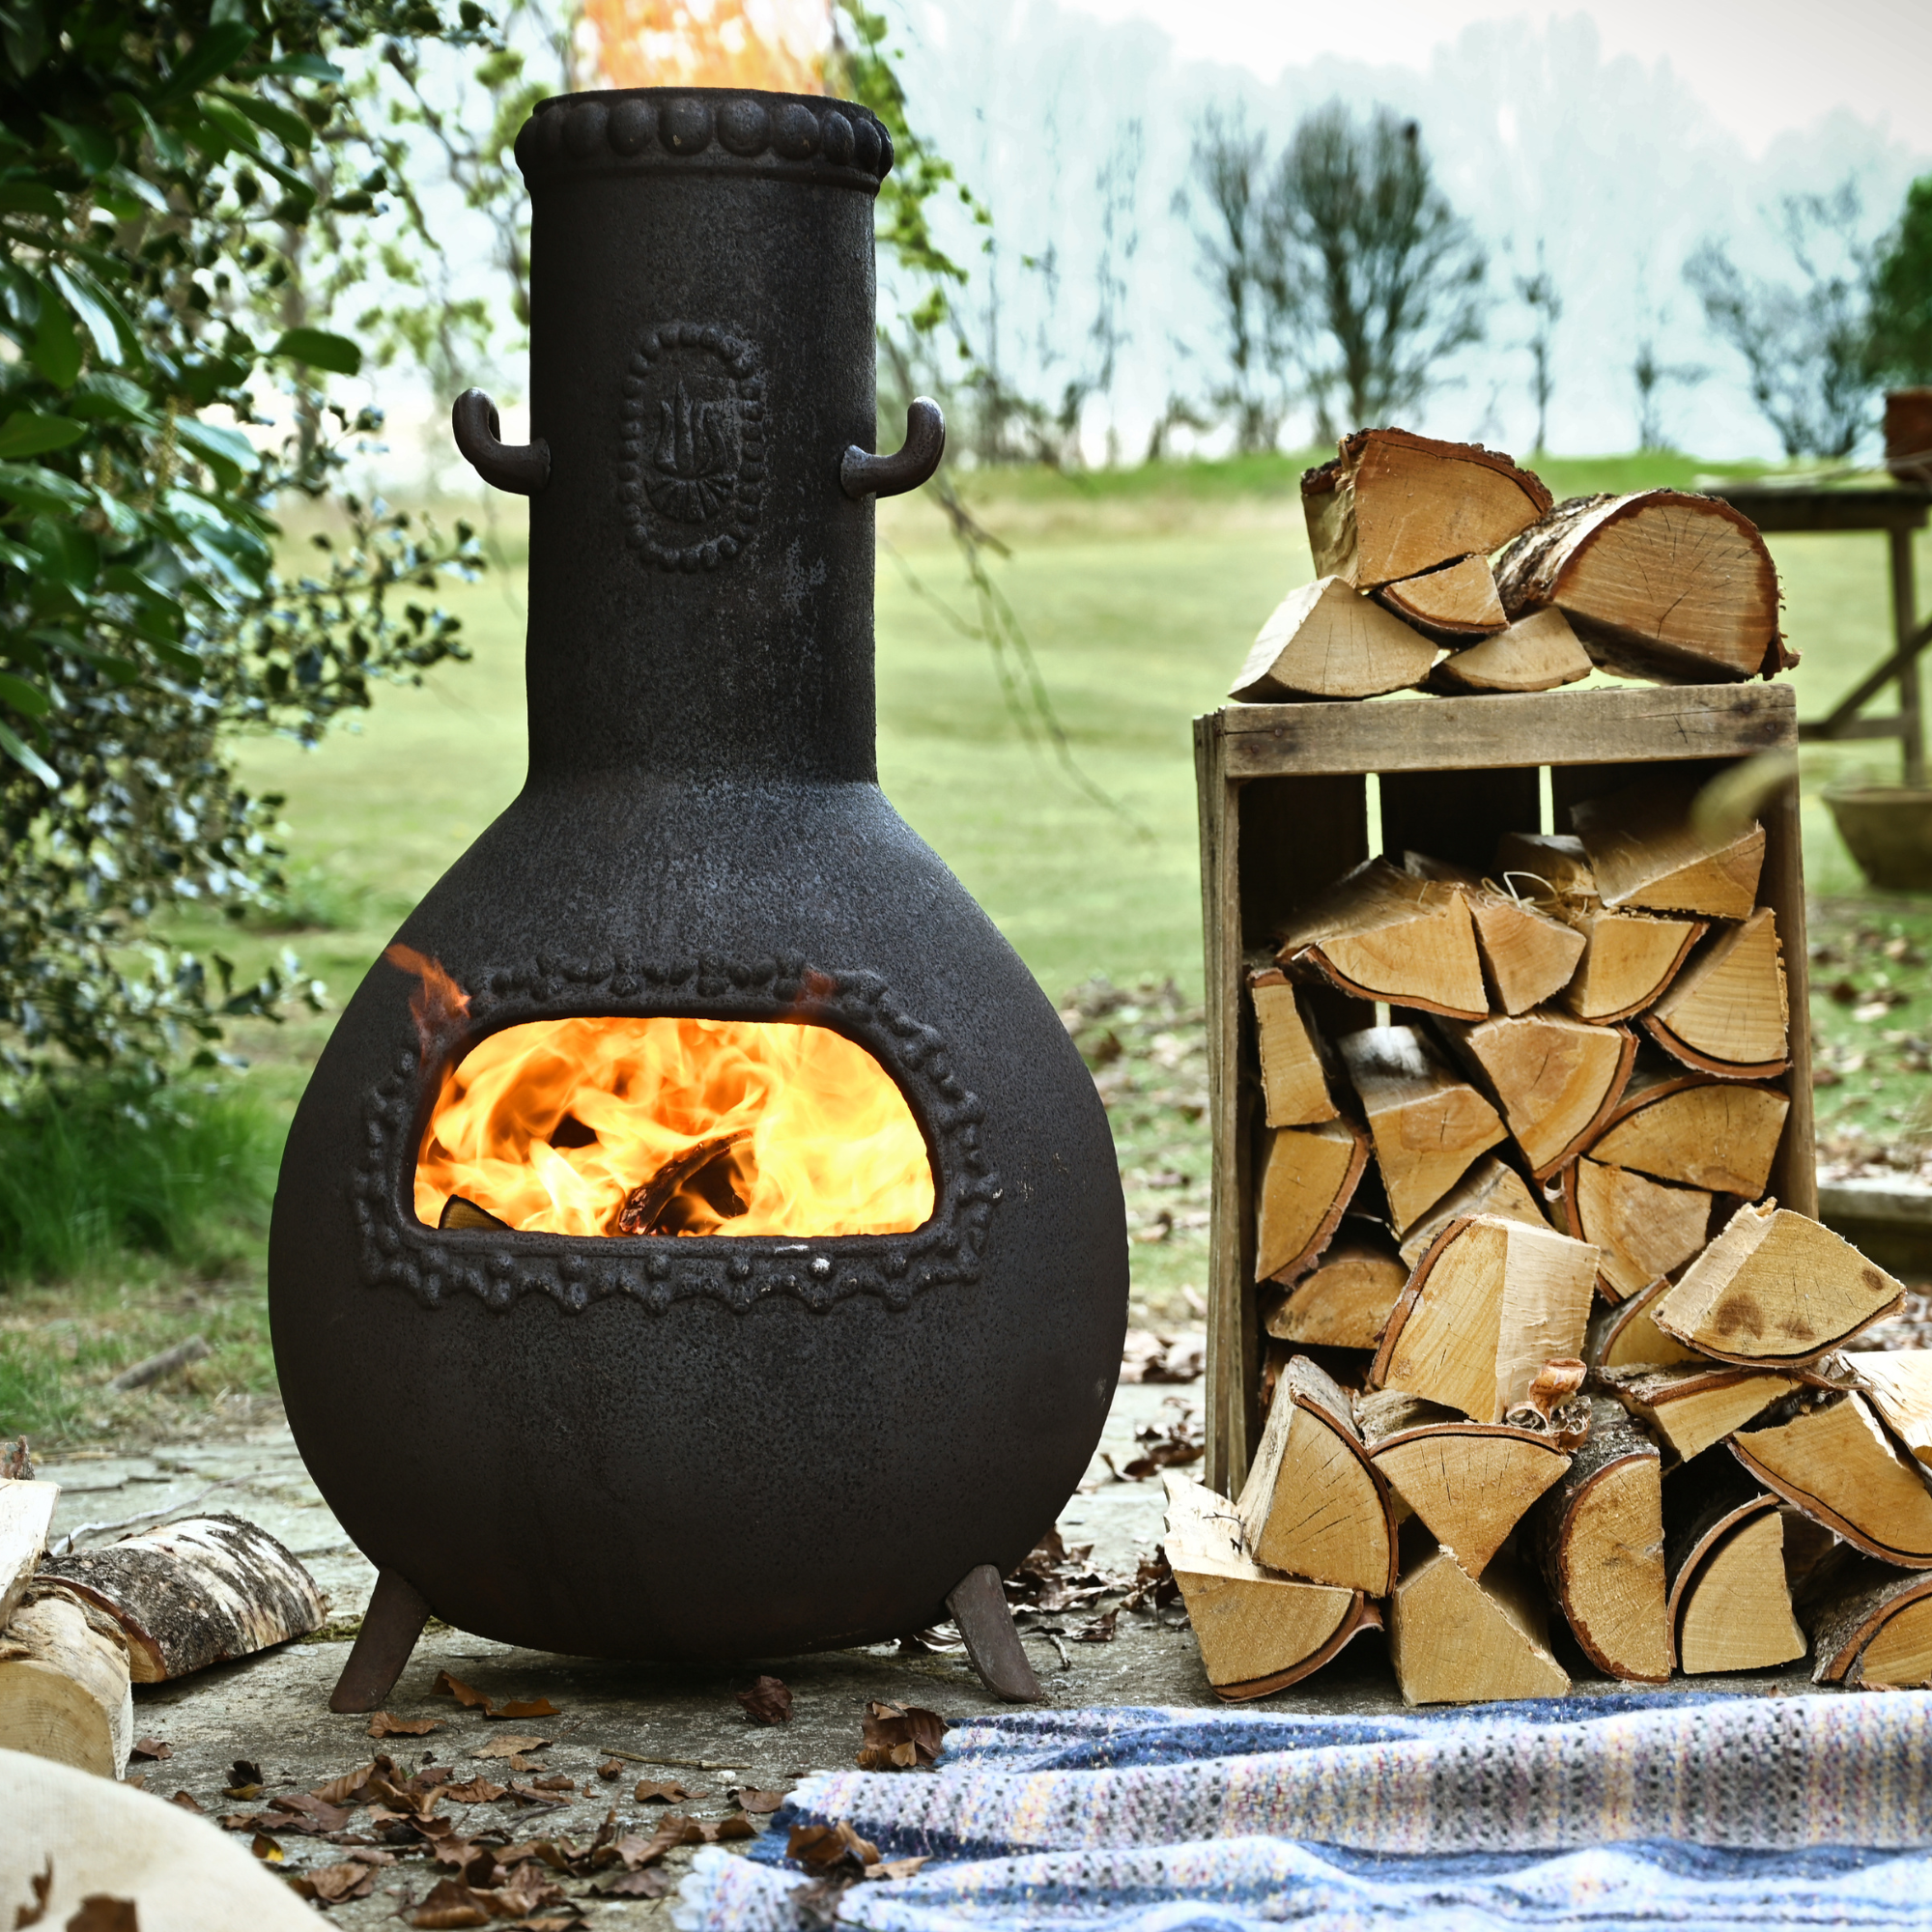 Birch Starter Kit. Kiln Dried Birch Logs, Kindling, Natural Firelighters and Matches